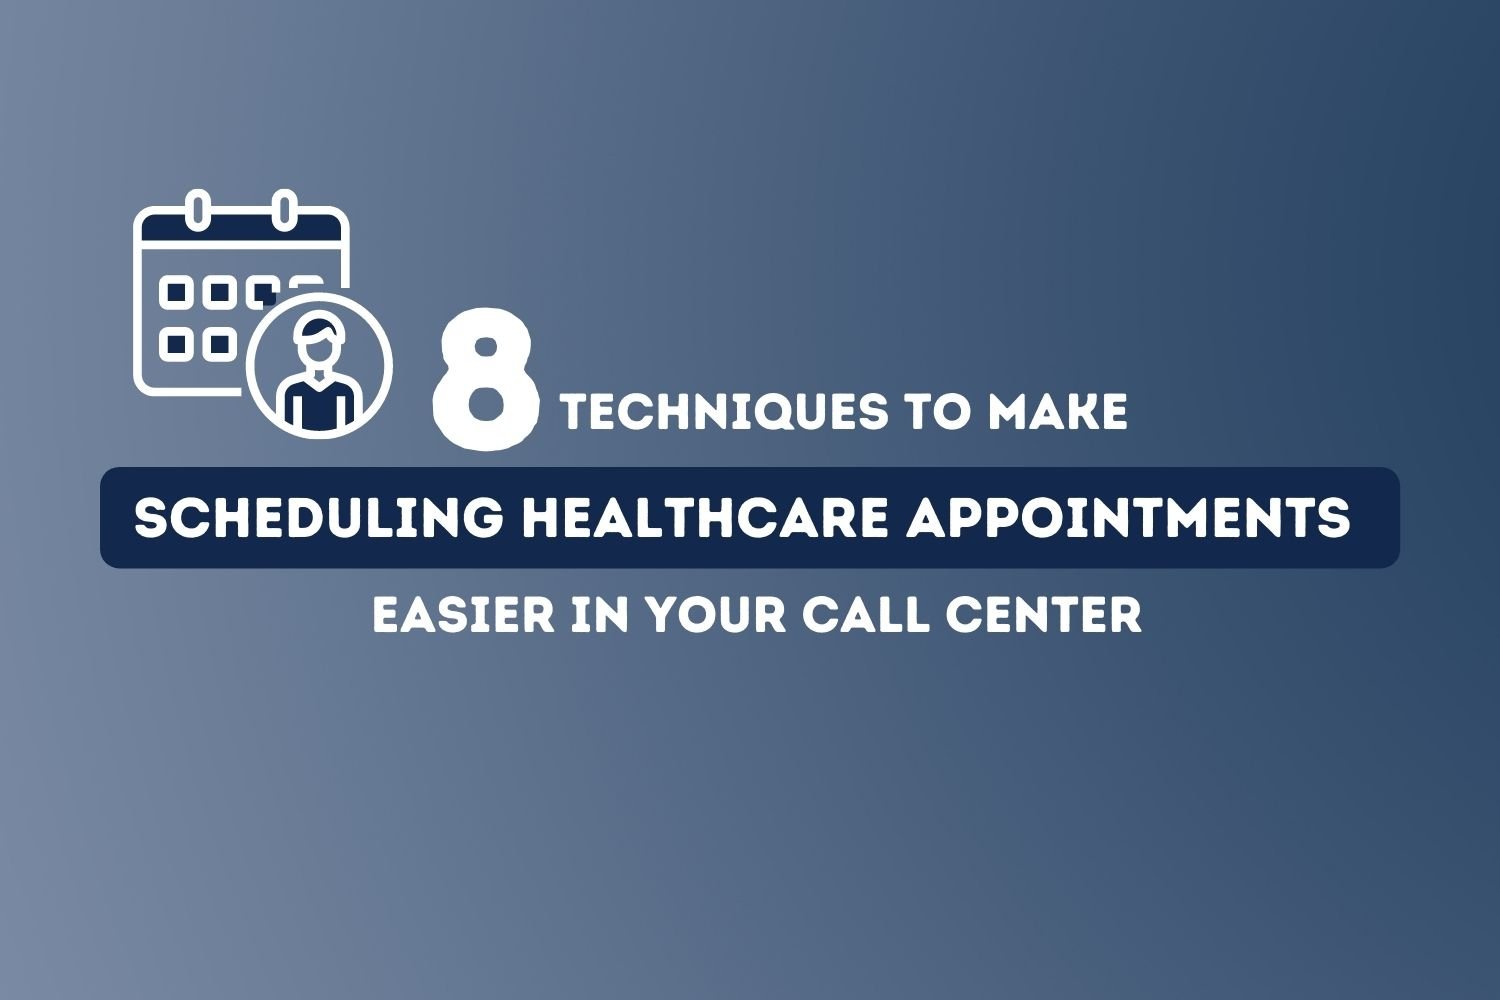 8 Techniques to Make Scheduling Healthcare Appointments Easier In Your Call Center